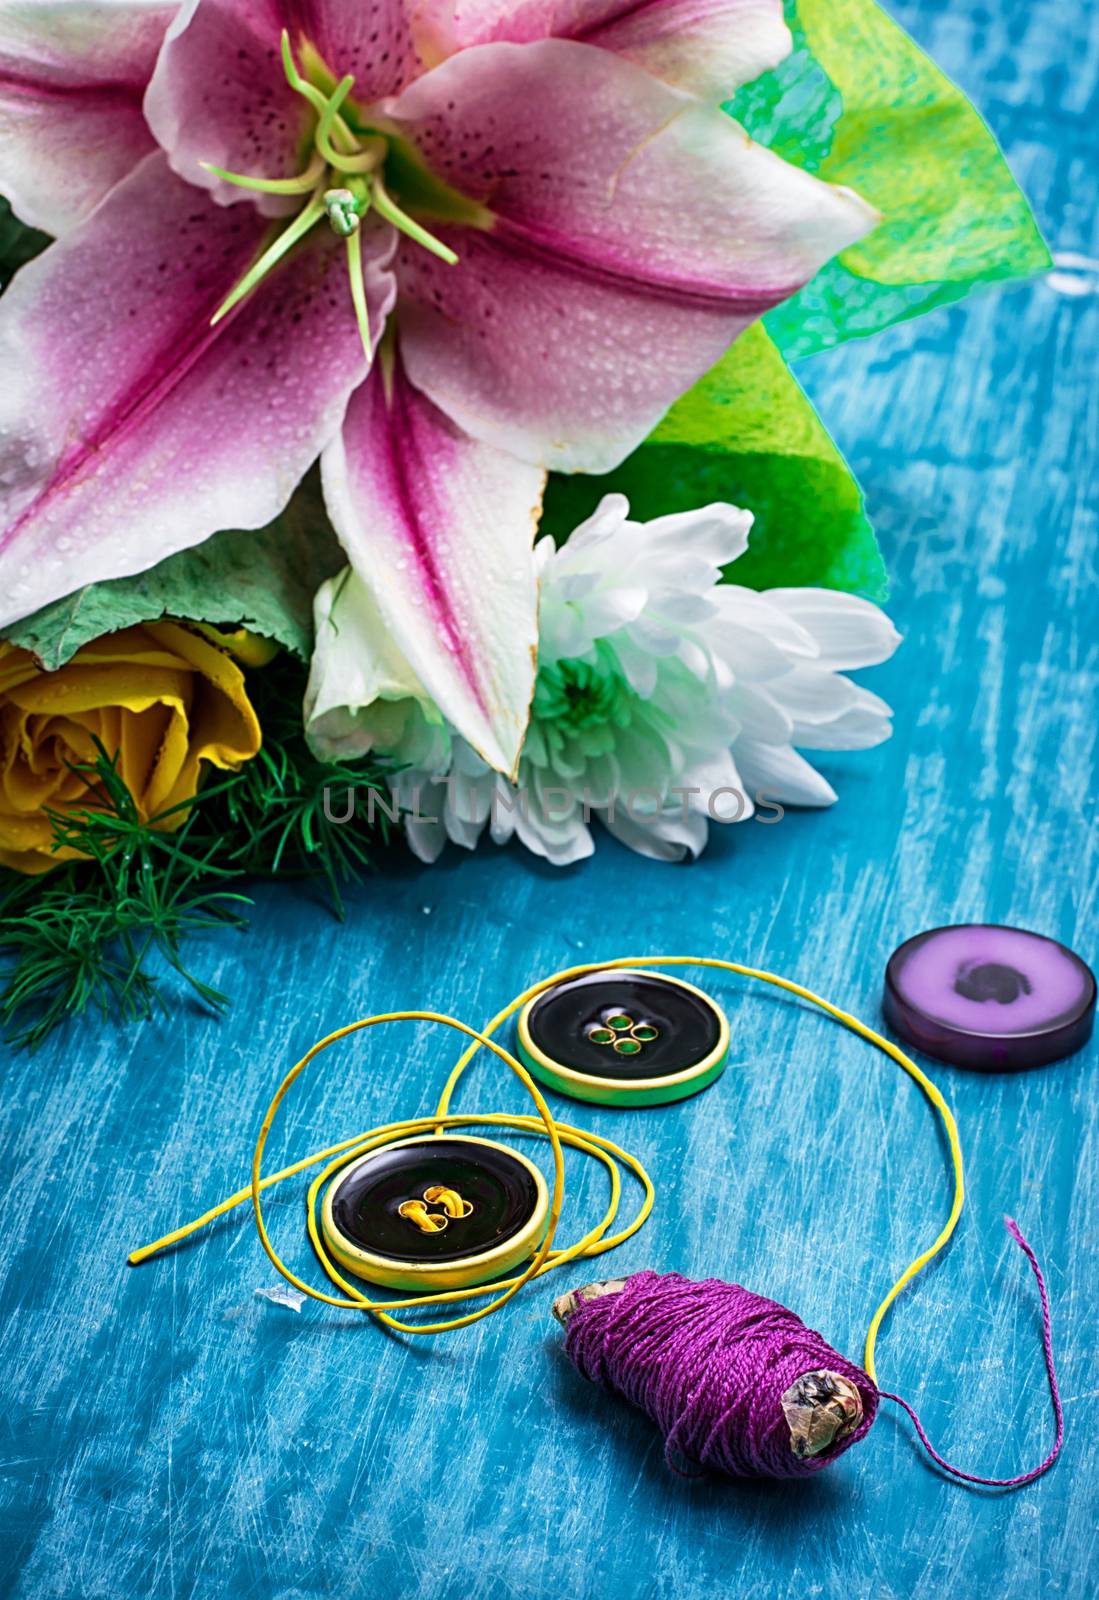 sewing accessories with a bouquet of fresh flowers on turquoise background